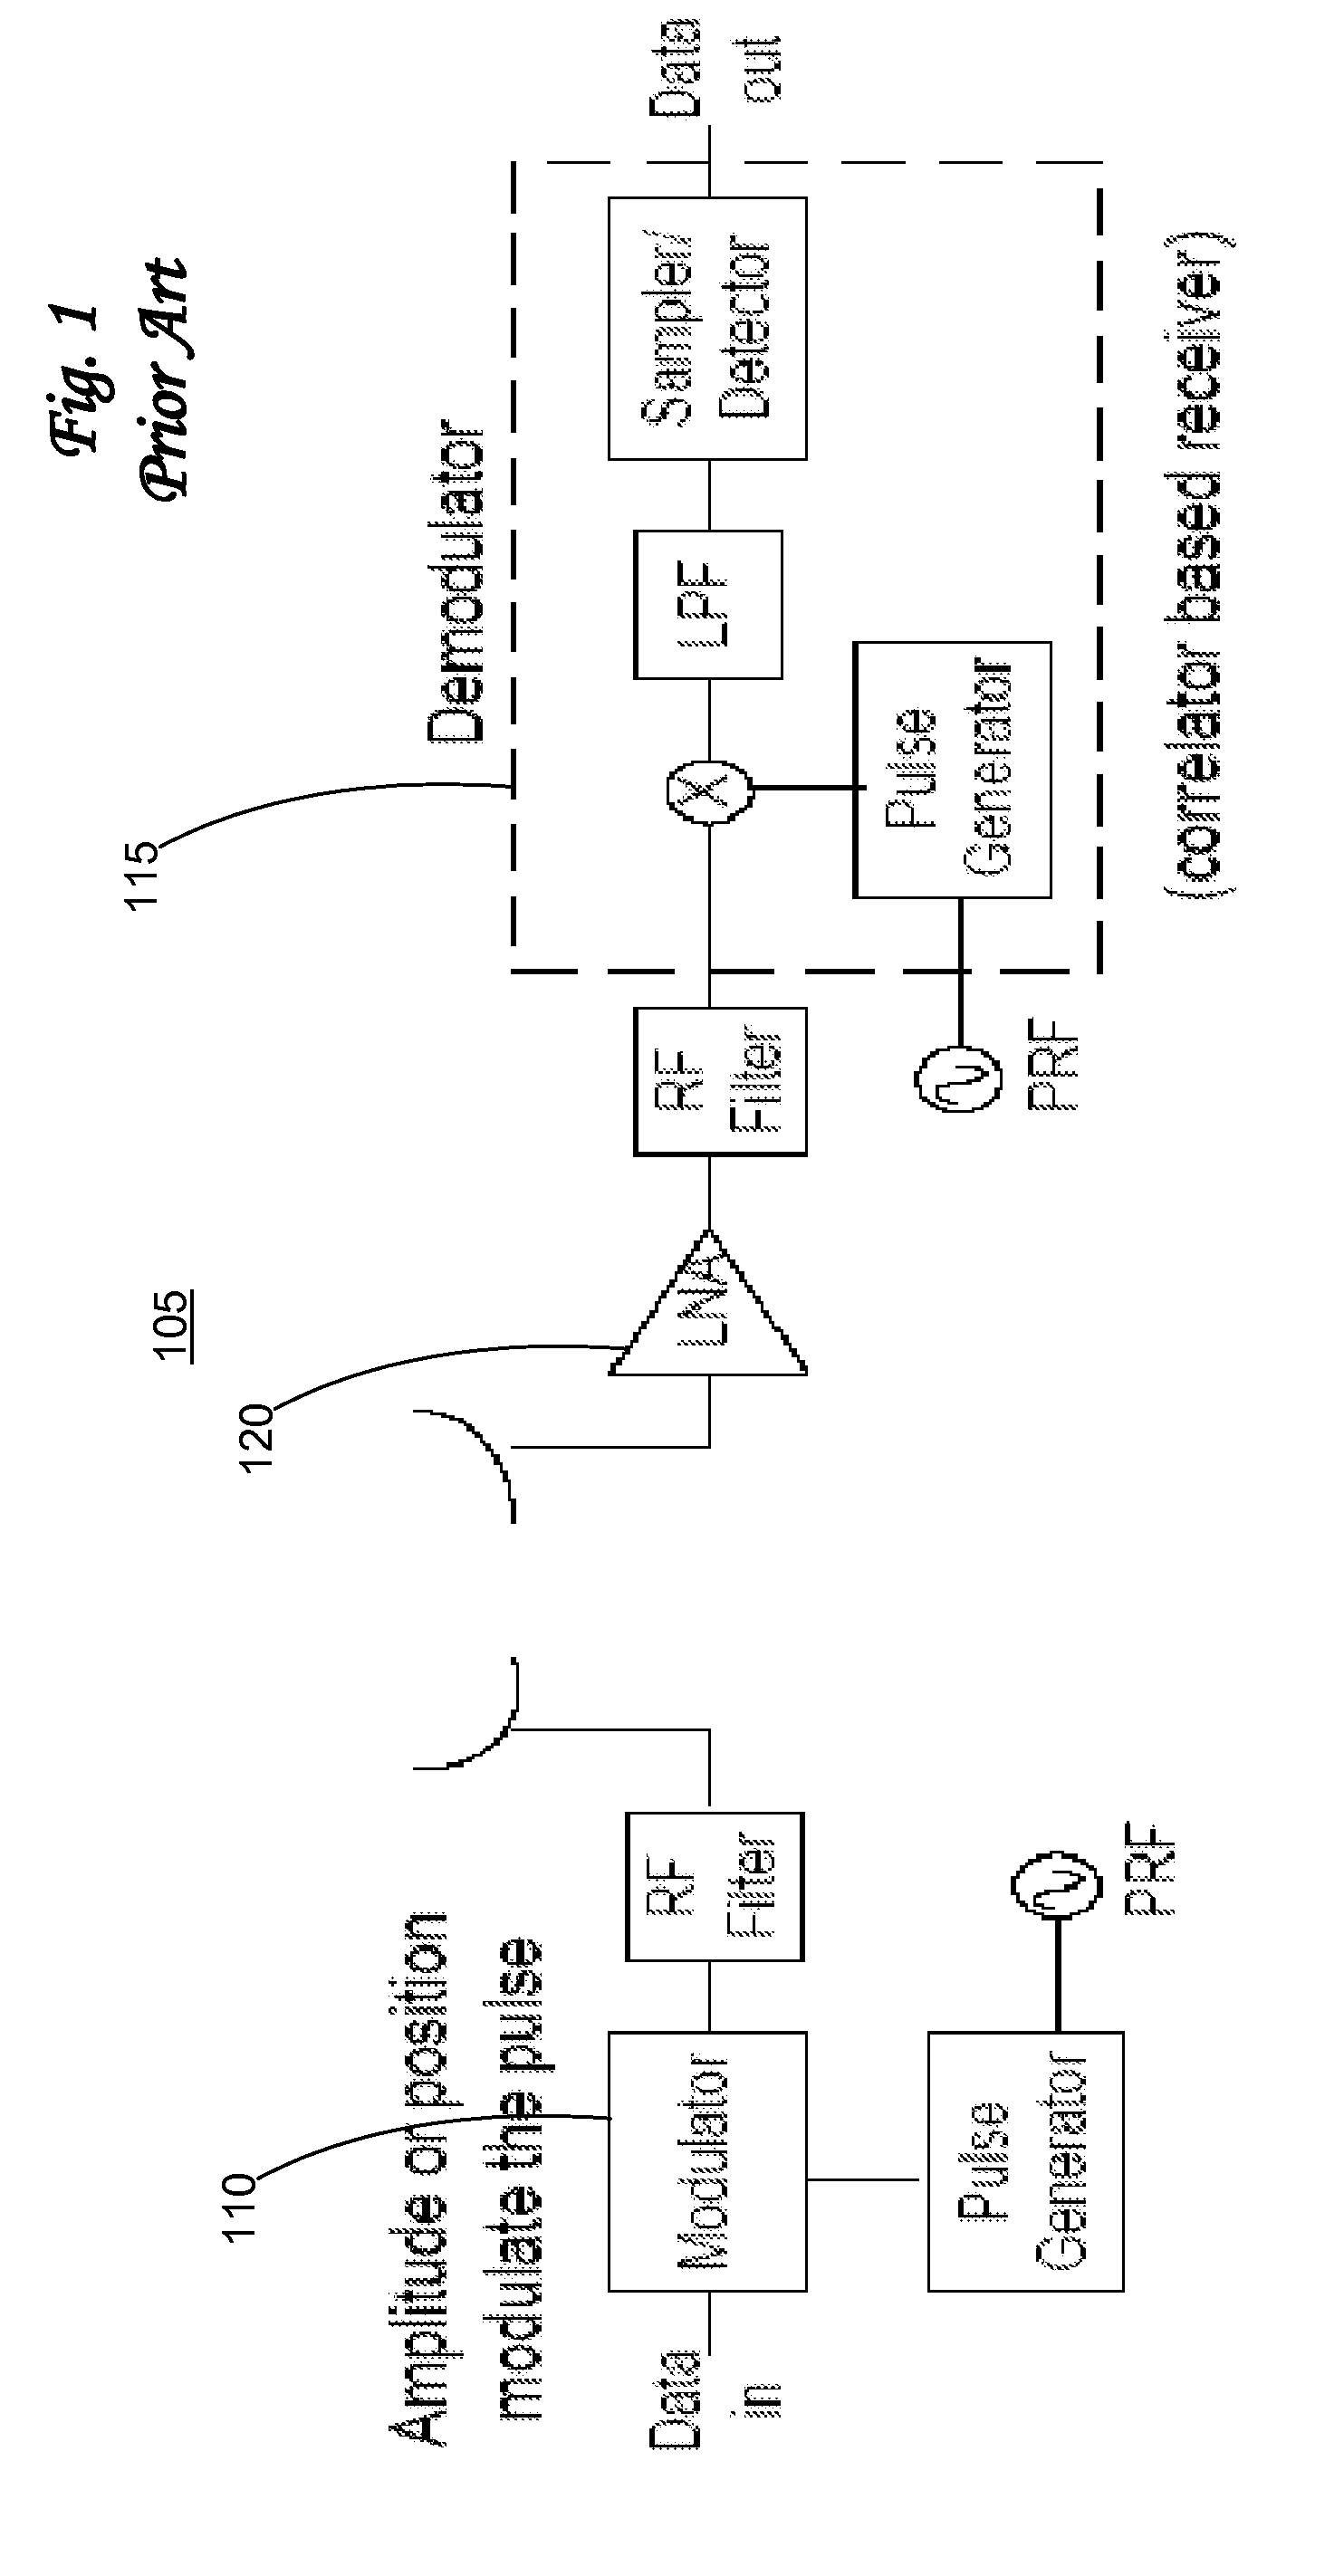 Systems and methods for electromagnetic band gap structure synthesis